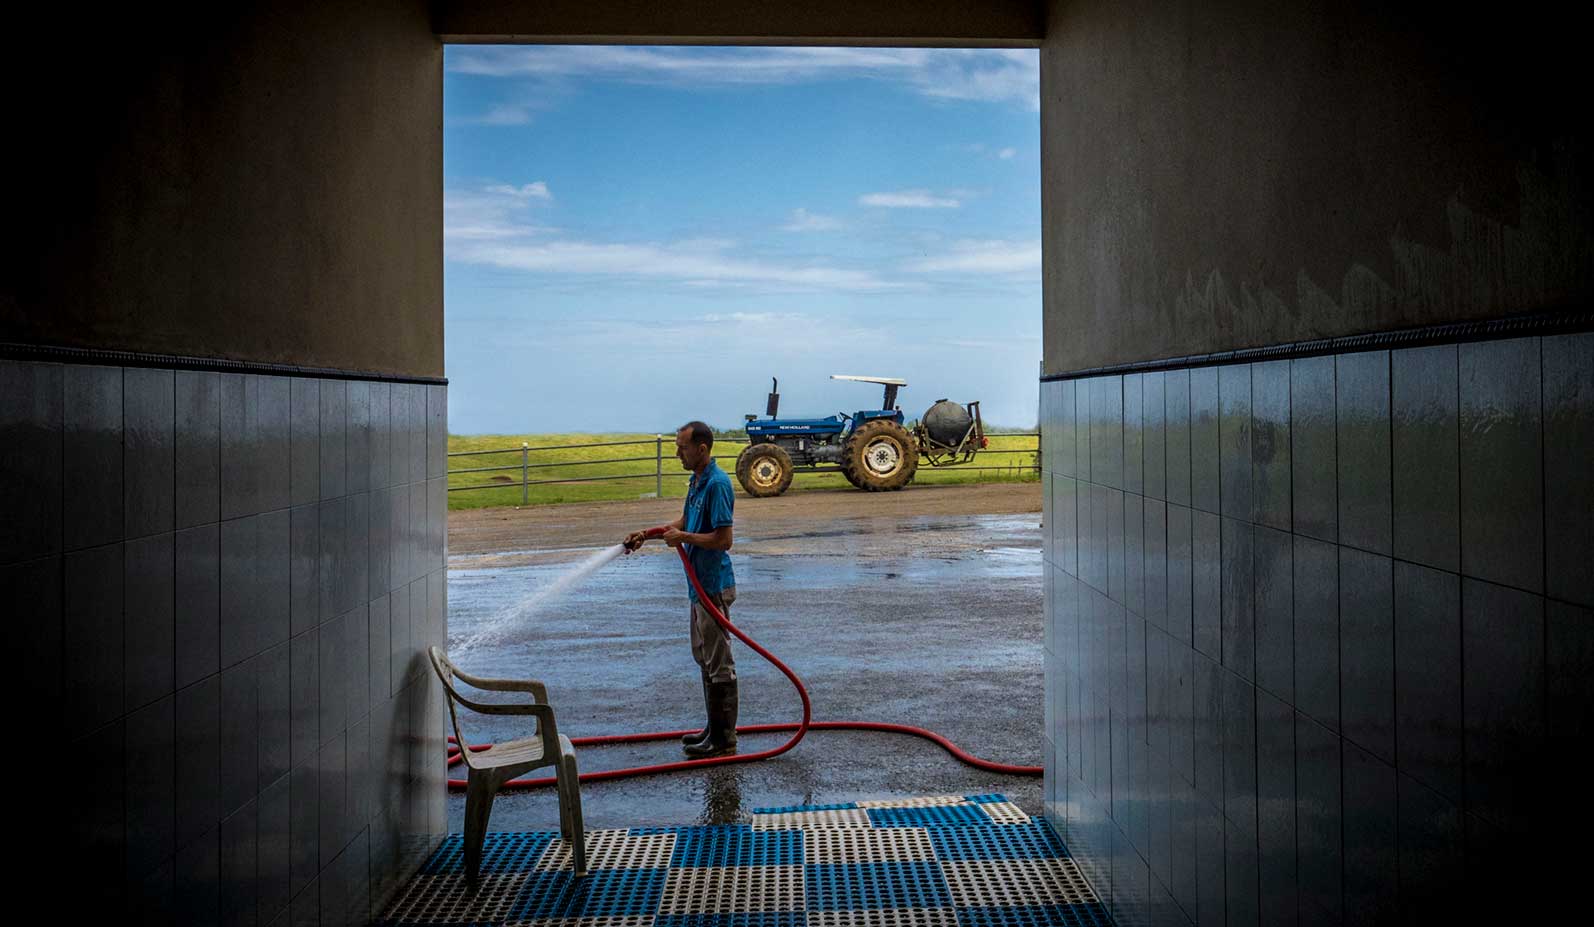 A dairy employee spraying down the entrance to a milking parlor with a high-pressure hose.